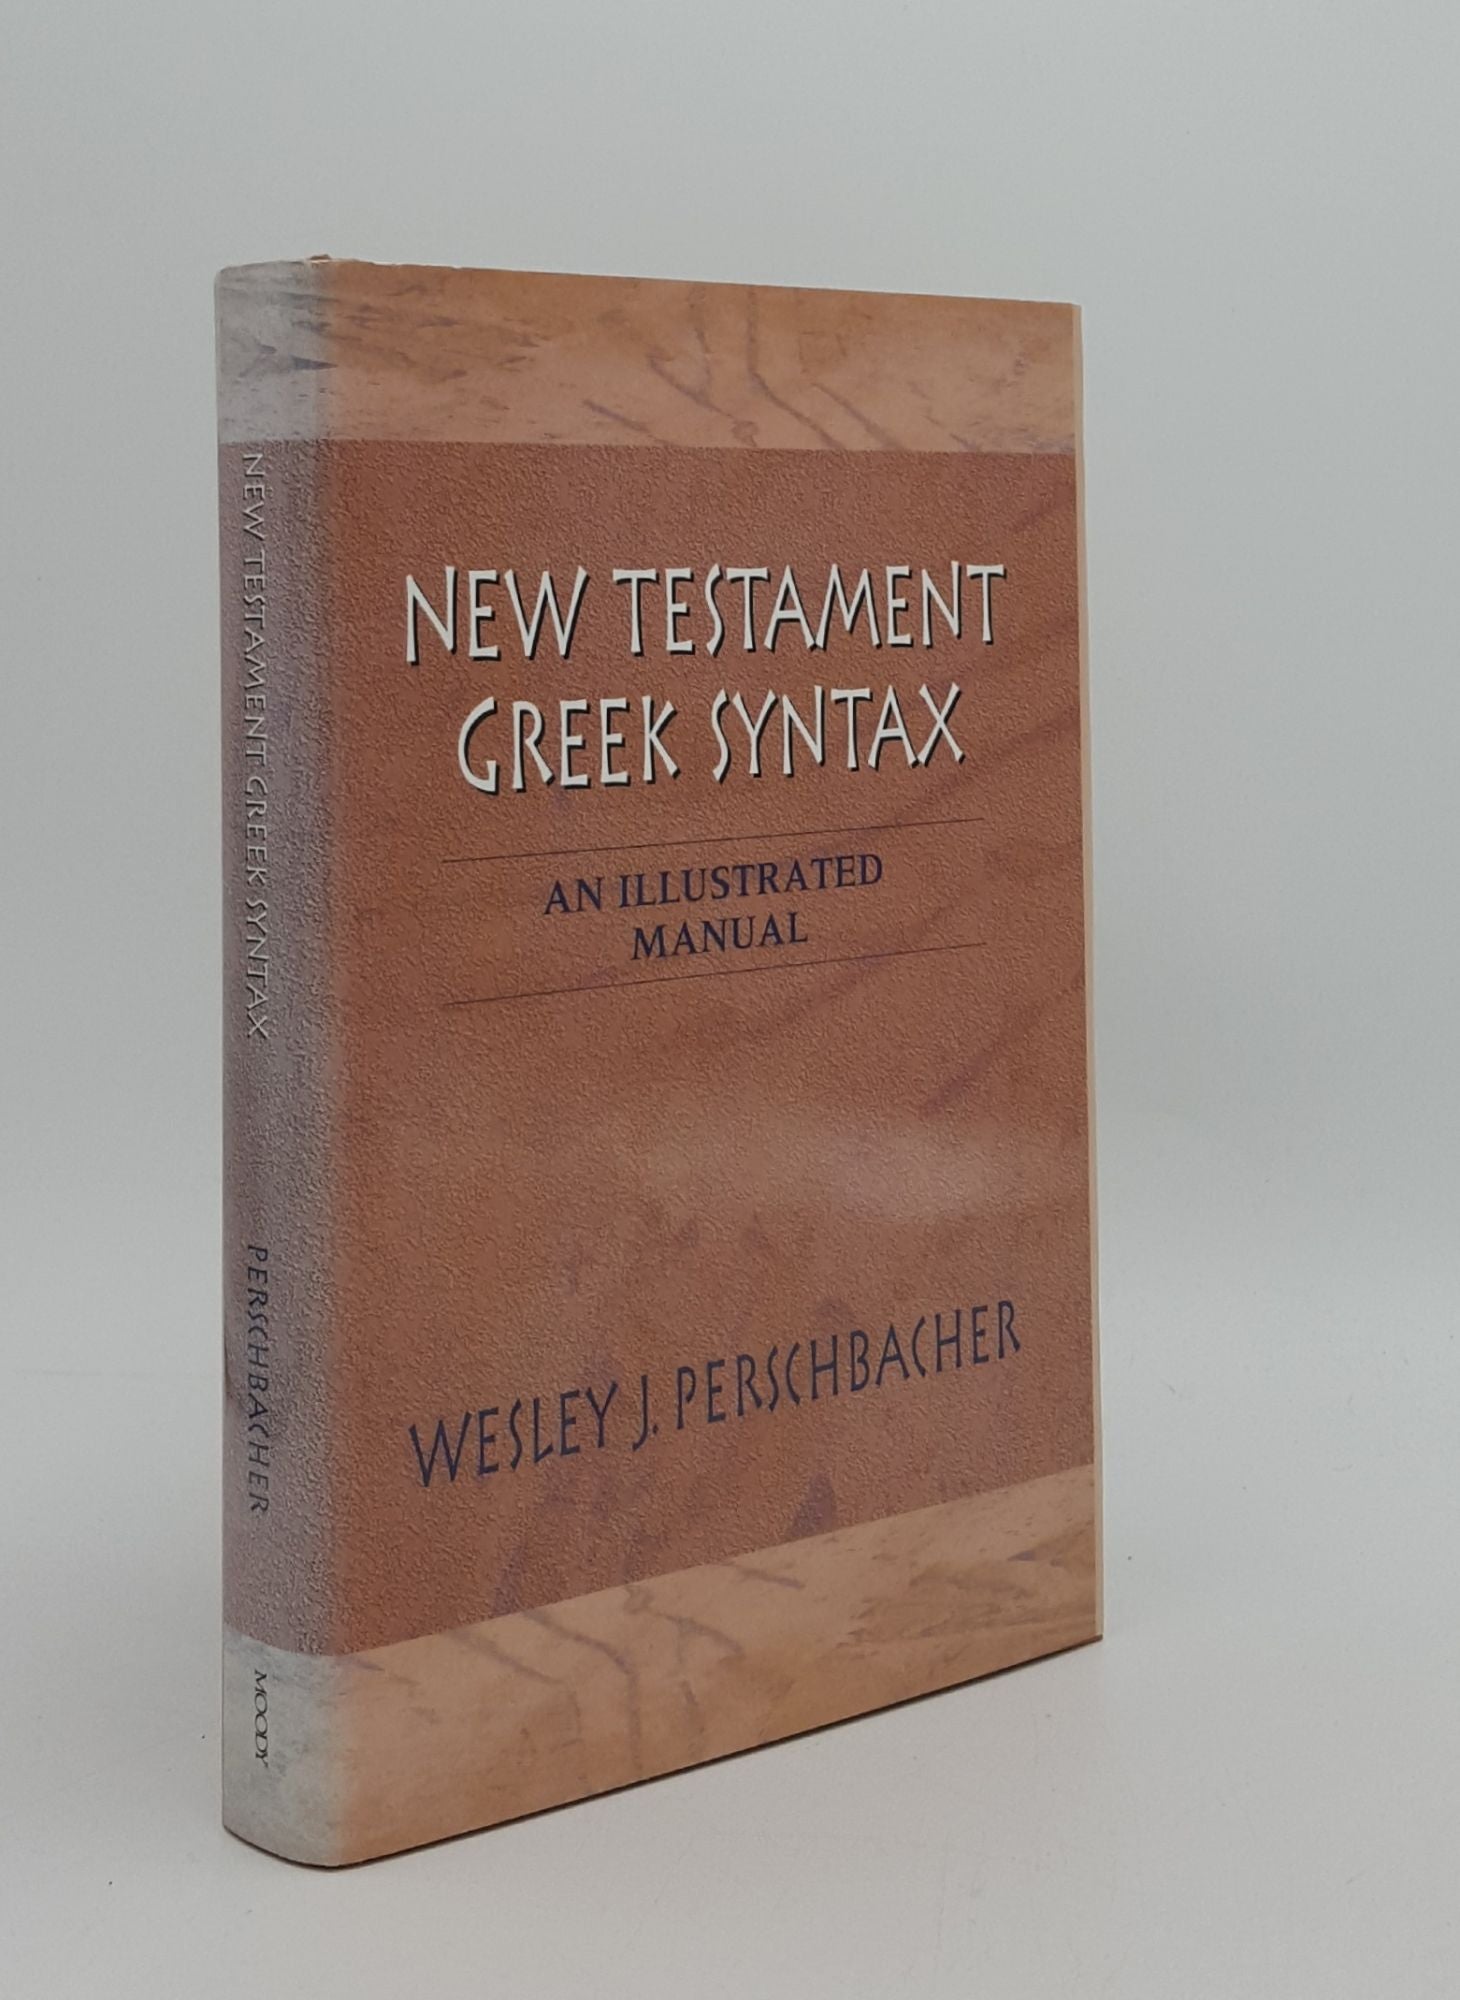 PERSCHBACHER Wesley J. - New Testament Greek Syntax an Illustrated Manual